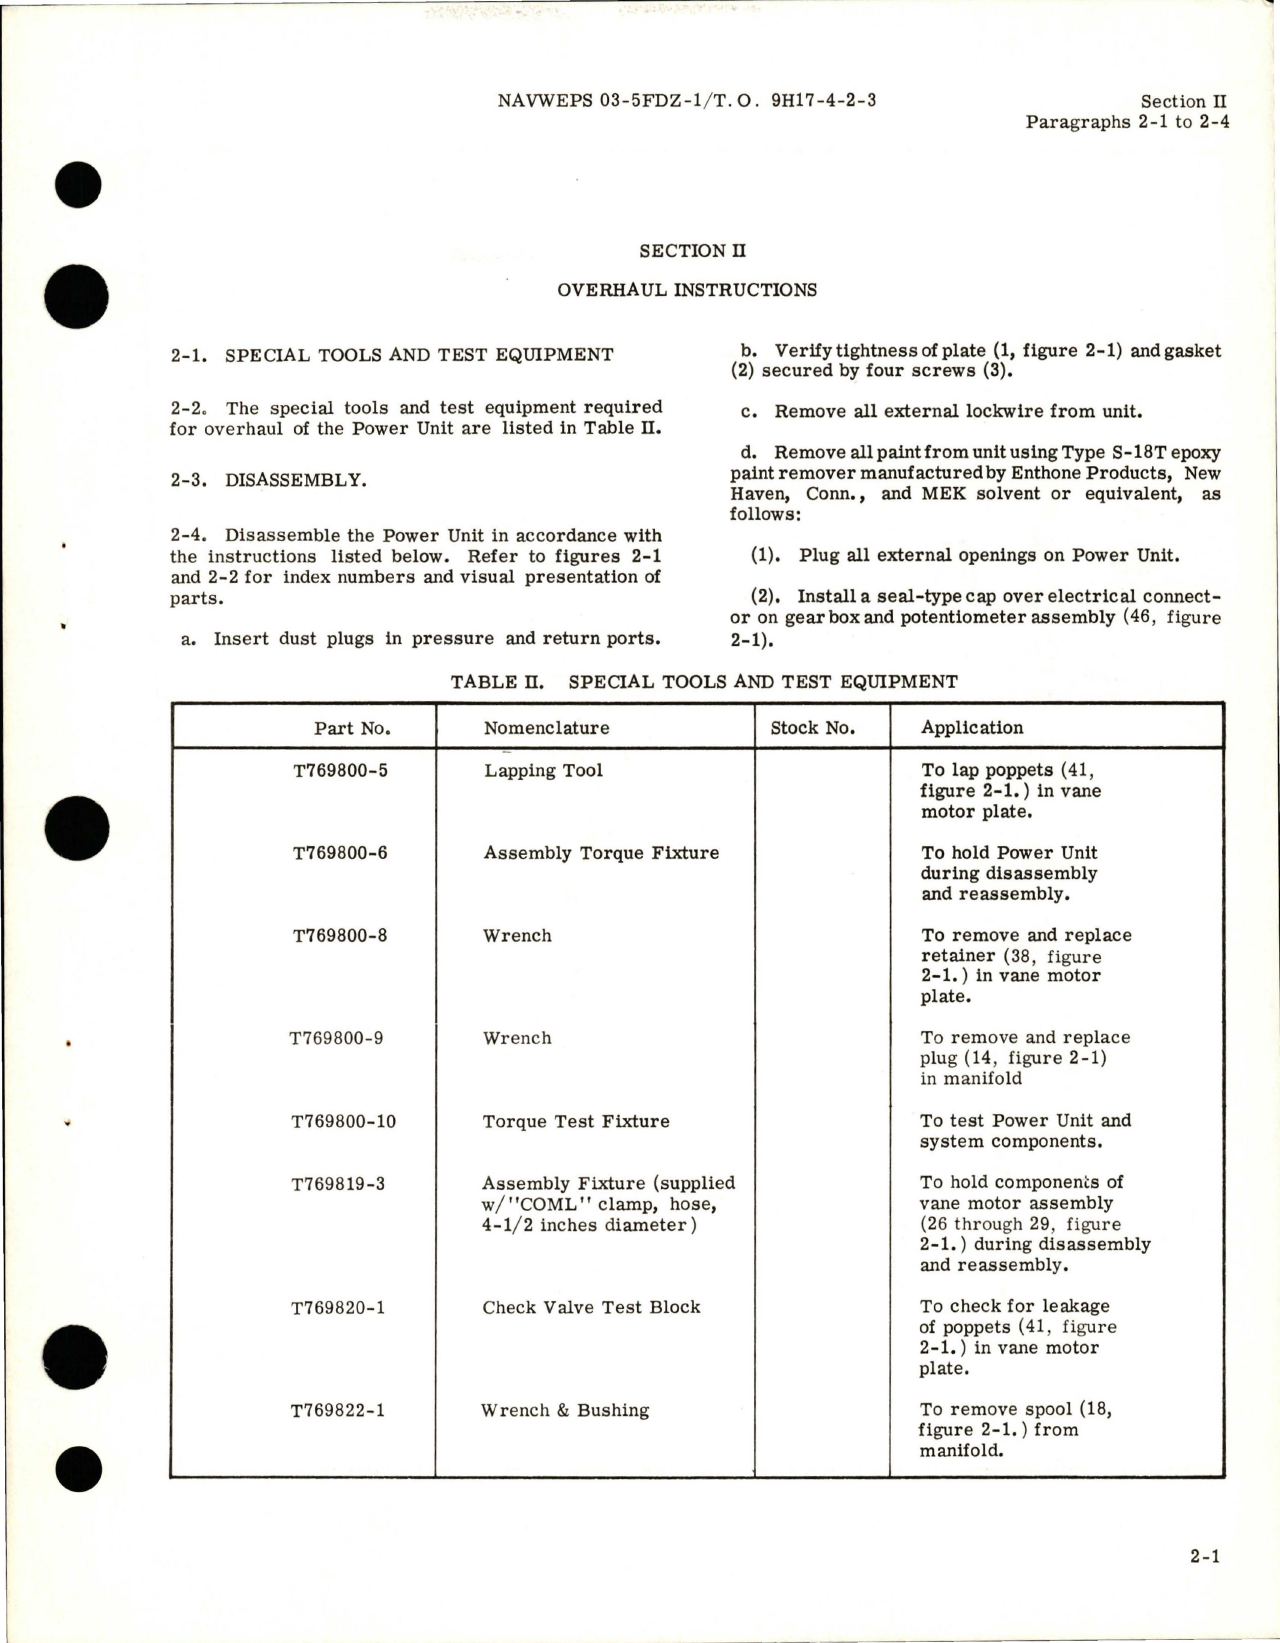 Sample page 7 from AirCorps Library document: Overhaul Instructions for Power Unit Assembly, Nose Wheel Steering Shimmy Damper System - Part OMP2202-6